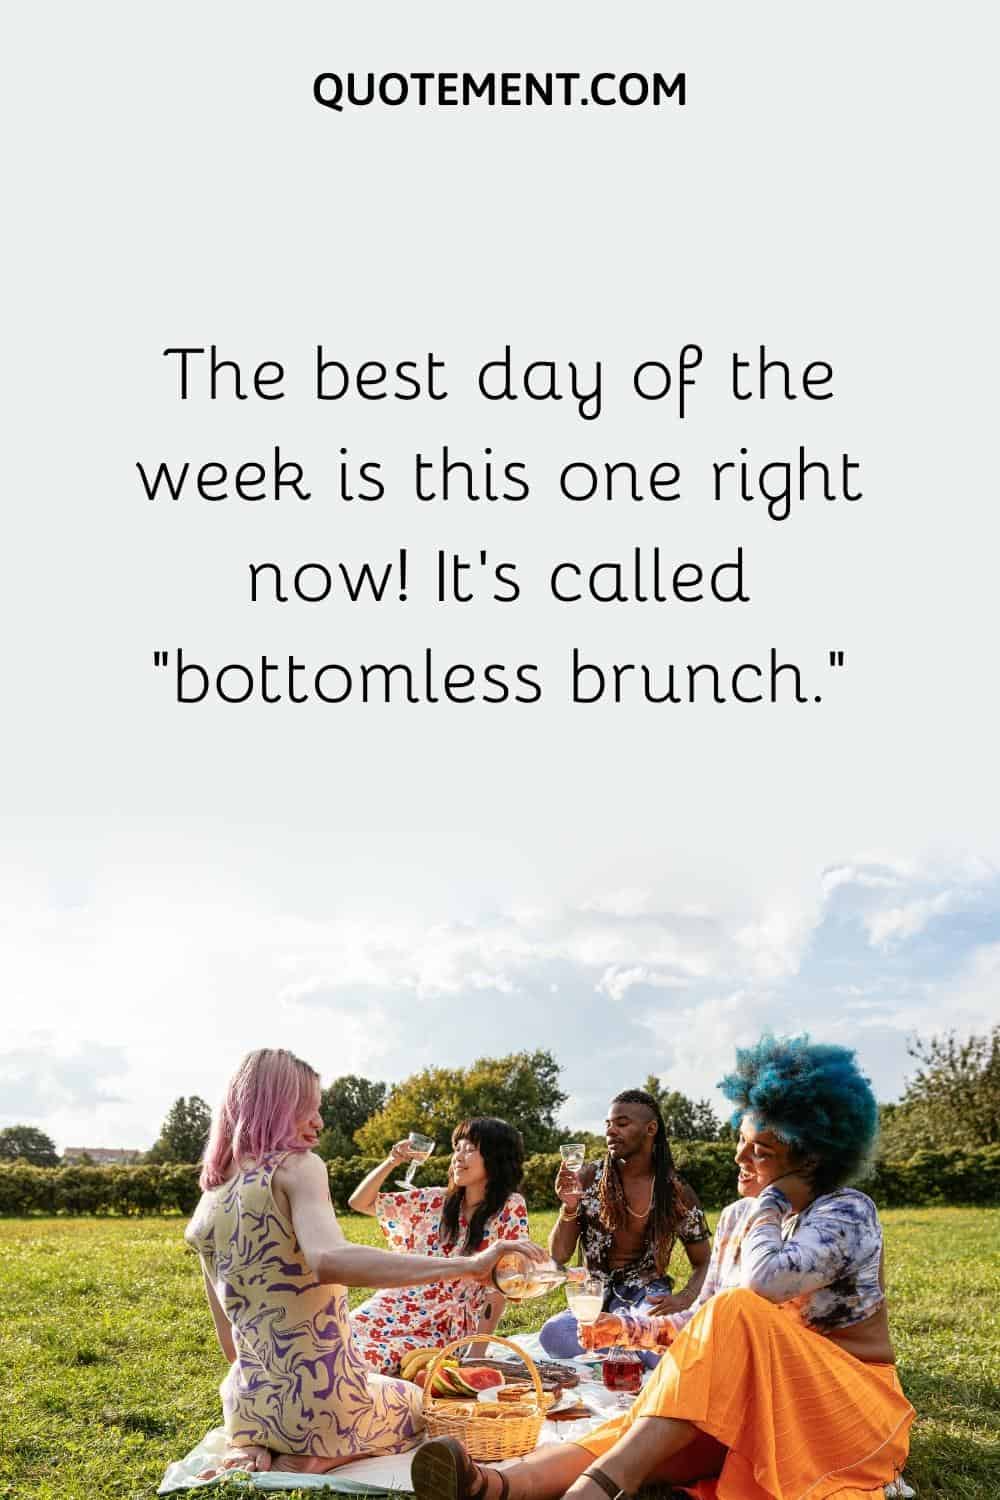 The best day of the week is this one right now! It's called bottomless brunch.